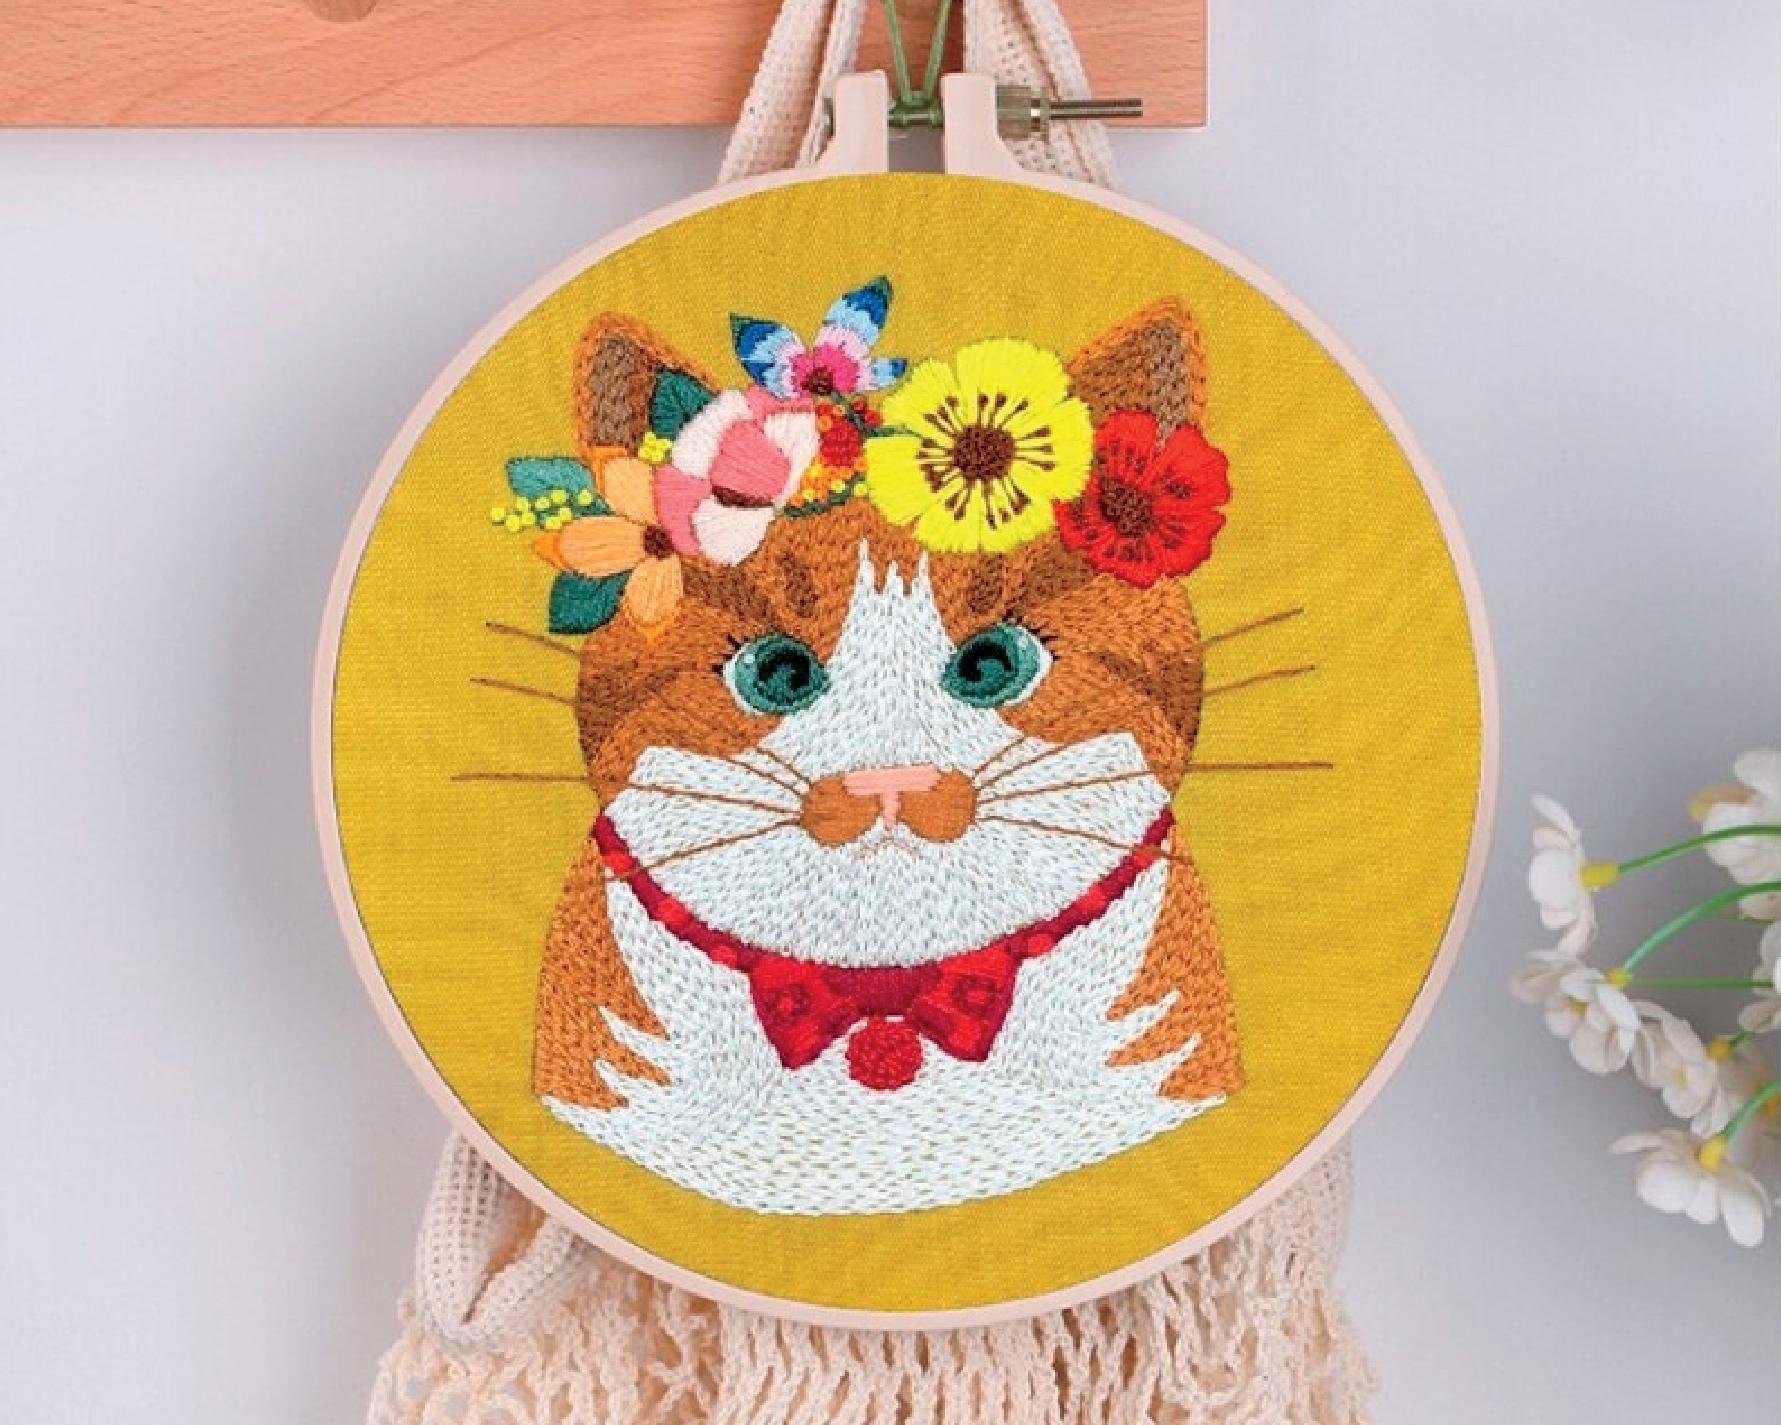 Sunset Embroidery Kit, Craft Kit for Beginners, Paisley Hoop Art, Modern Needlework  Set, Nature Lovers Gift, DIY Embroidery Pattern 